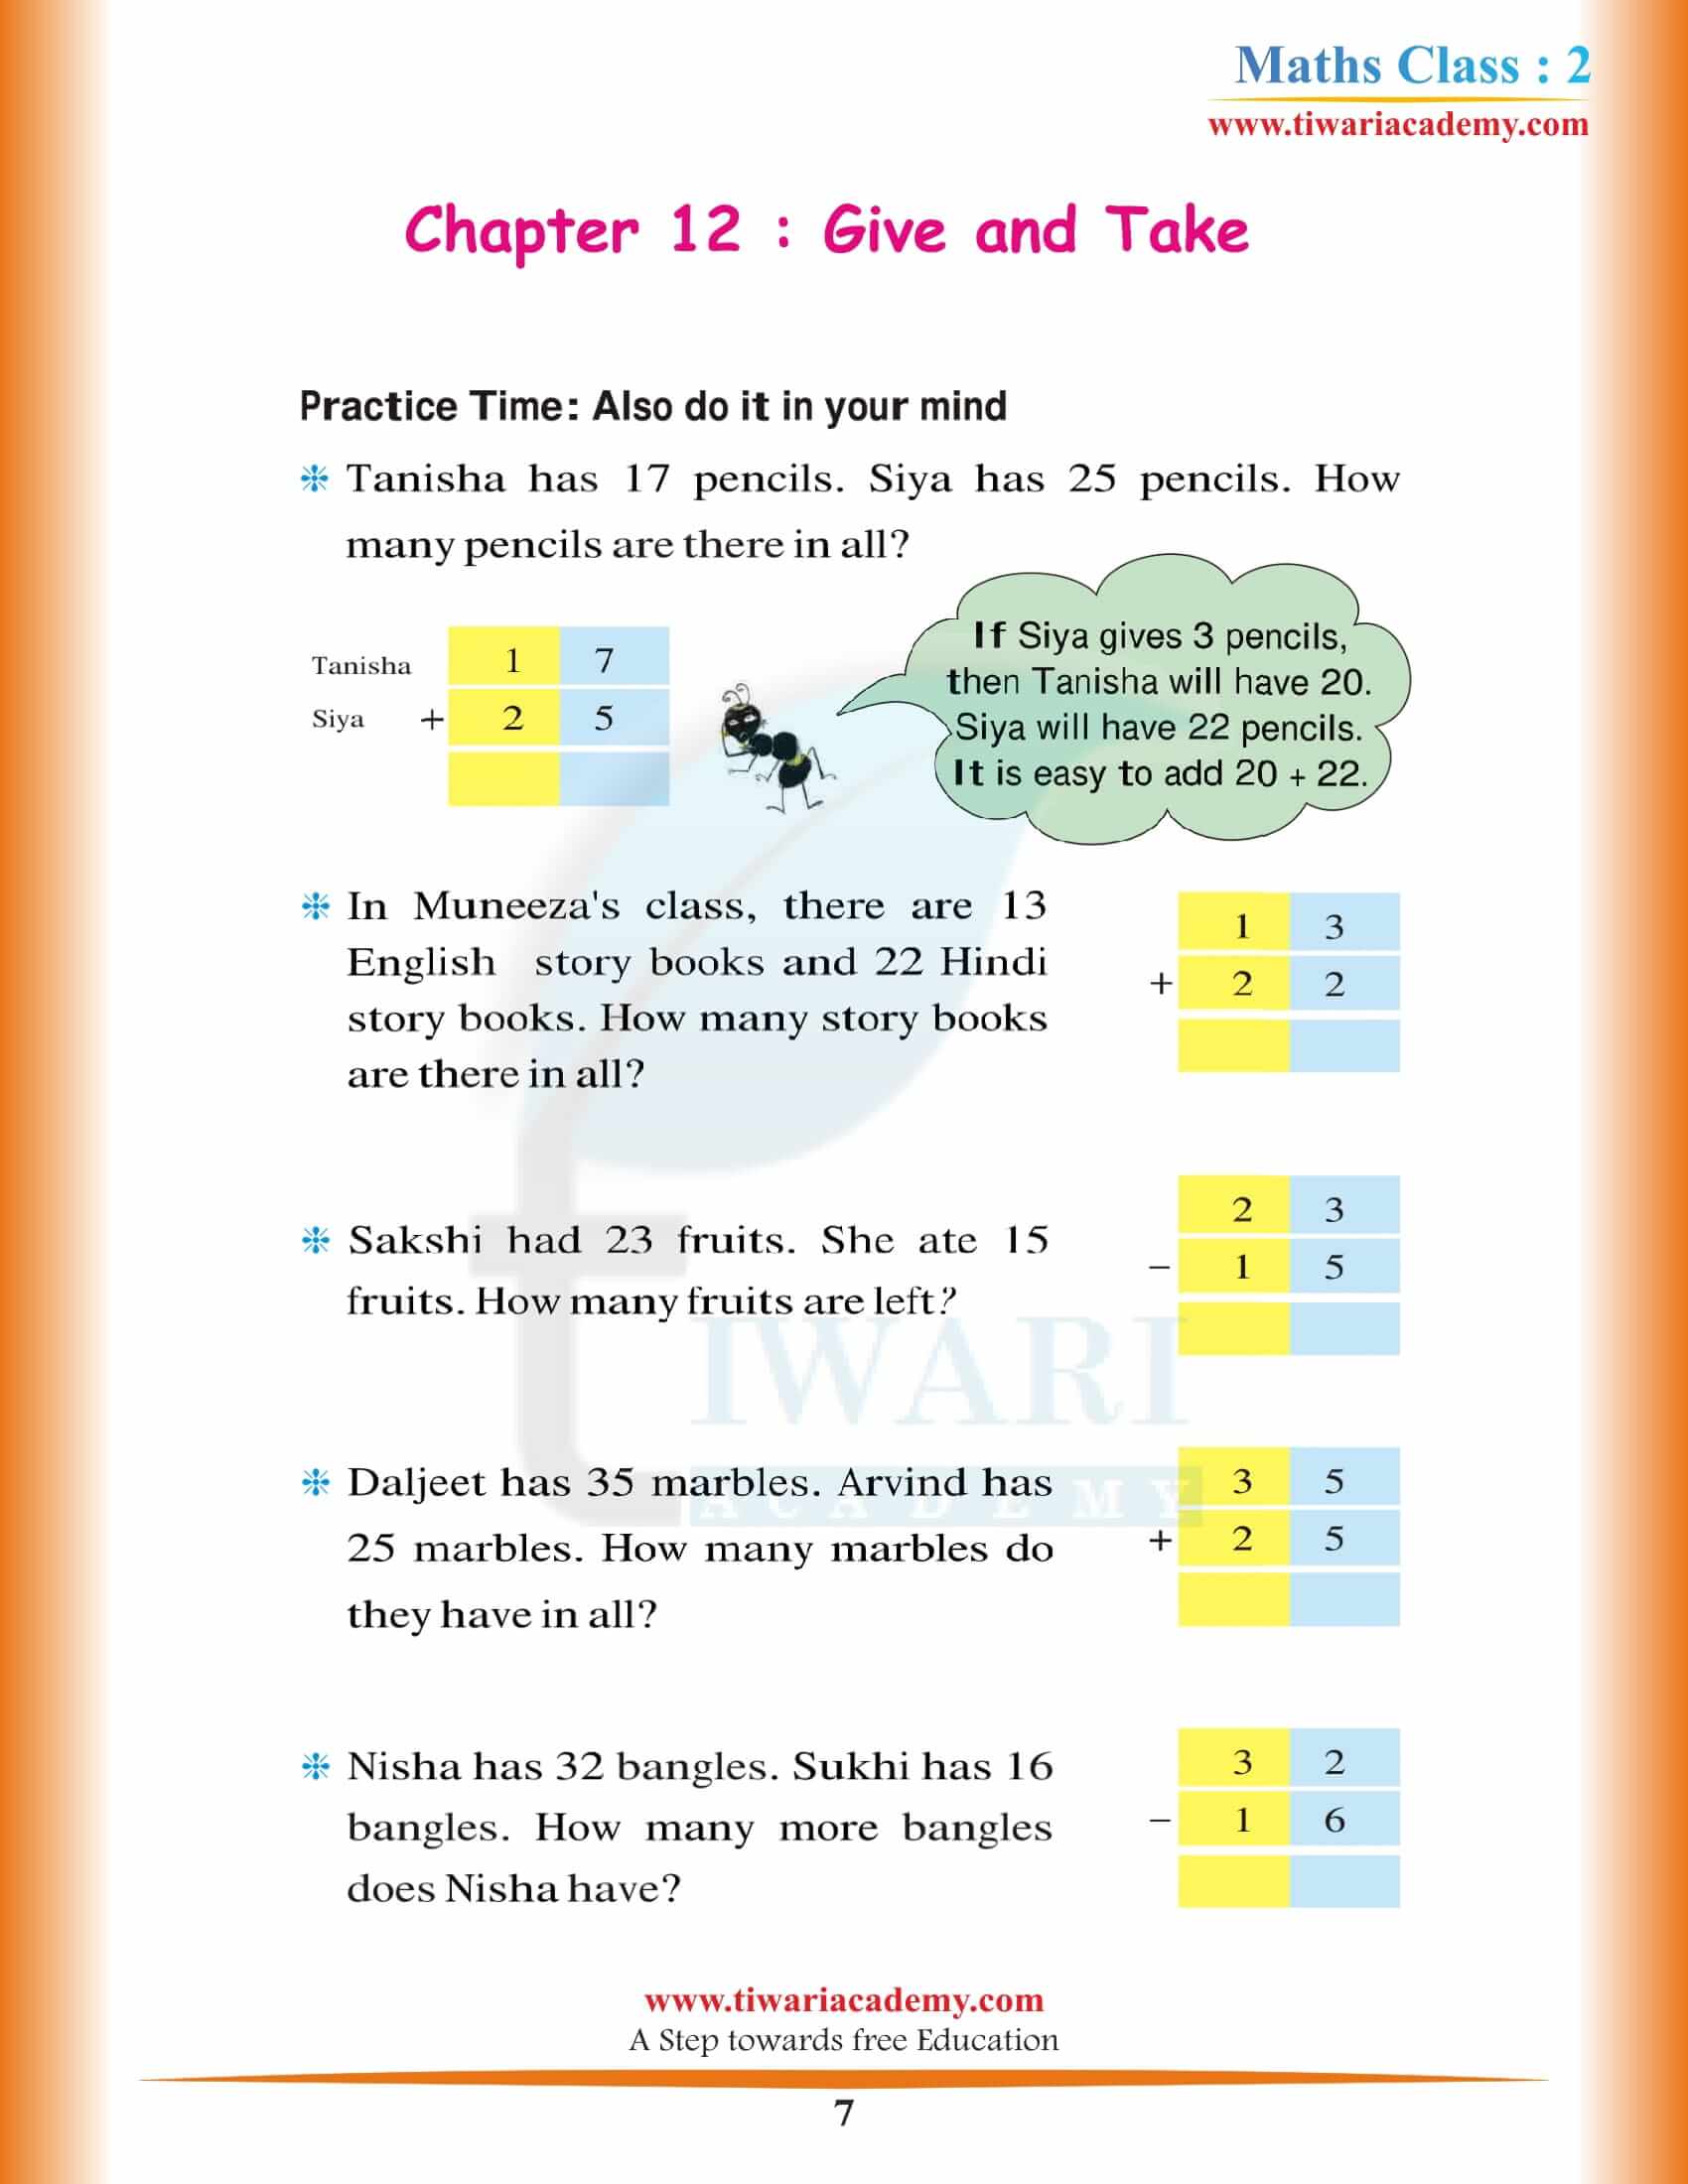 NCERT Solutions for Class 2 Maths Chapter 12 free download